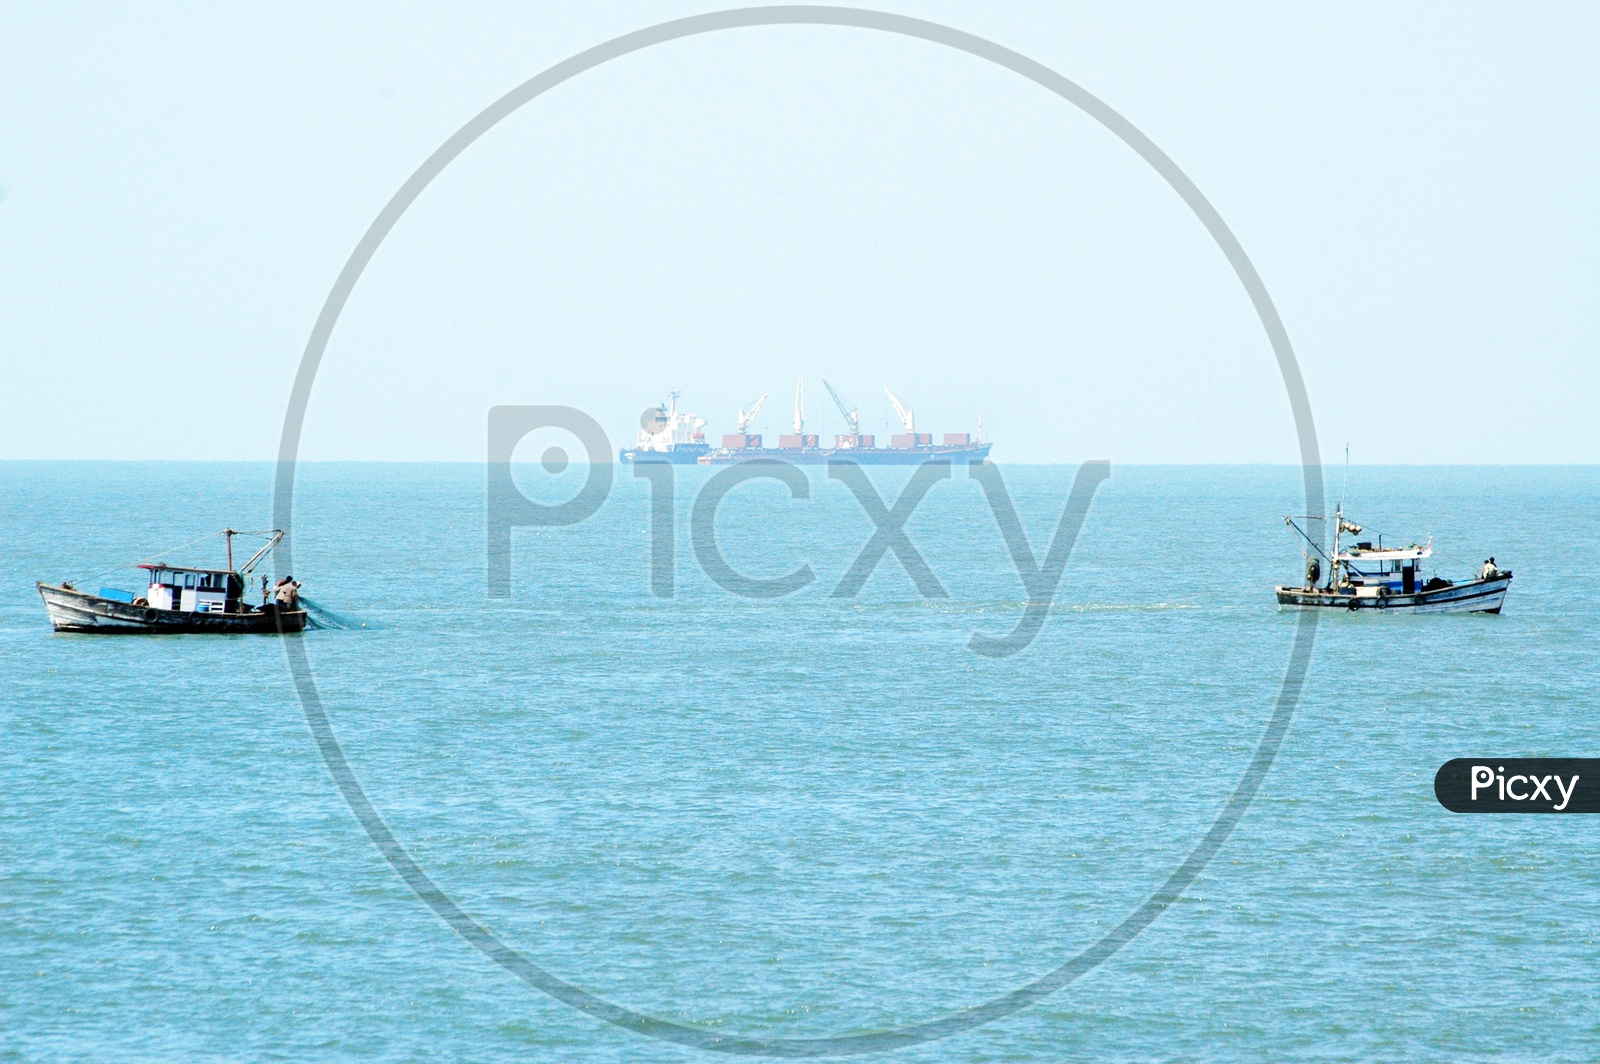 Fishing boats and a ship in the sea